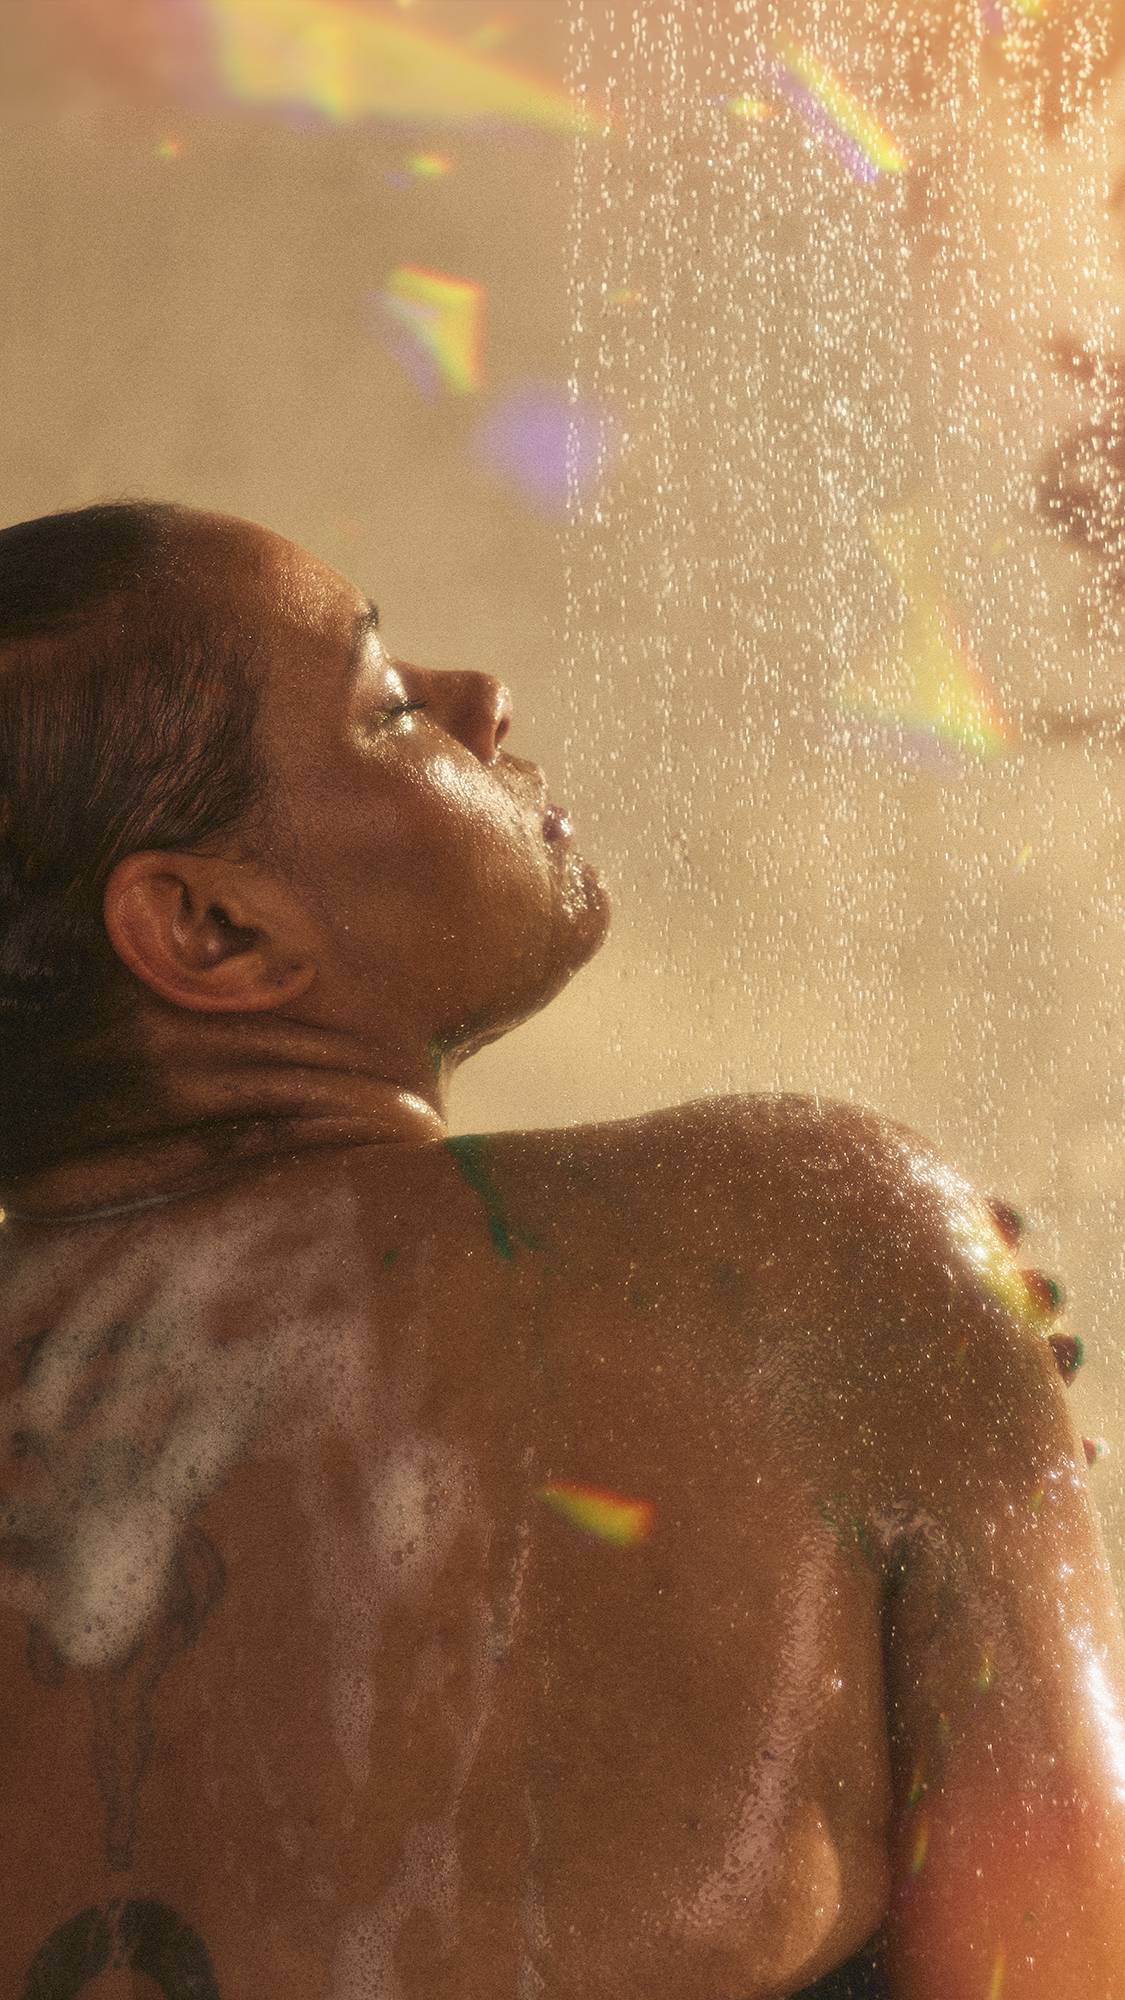 The model is under the running shower water facing away as they lather the Magik shower gel over their shoulder. The image has flecks of rainbow reflections on a warm, sepia tone.